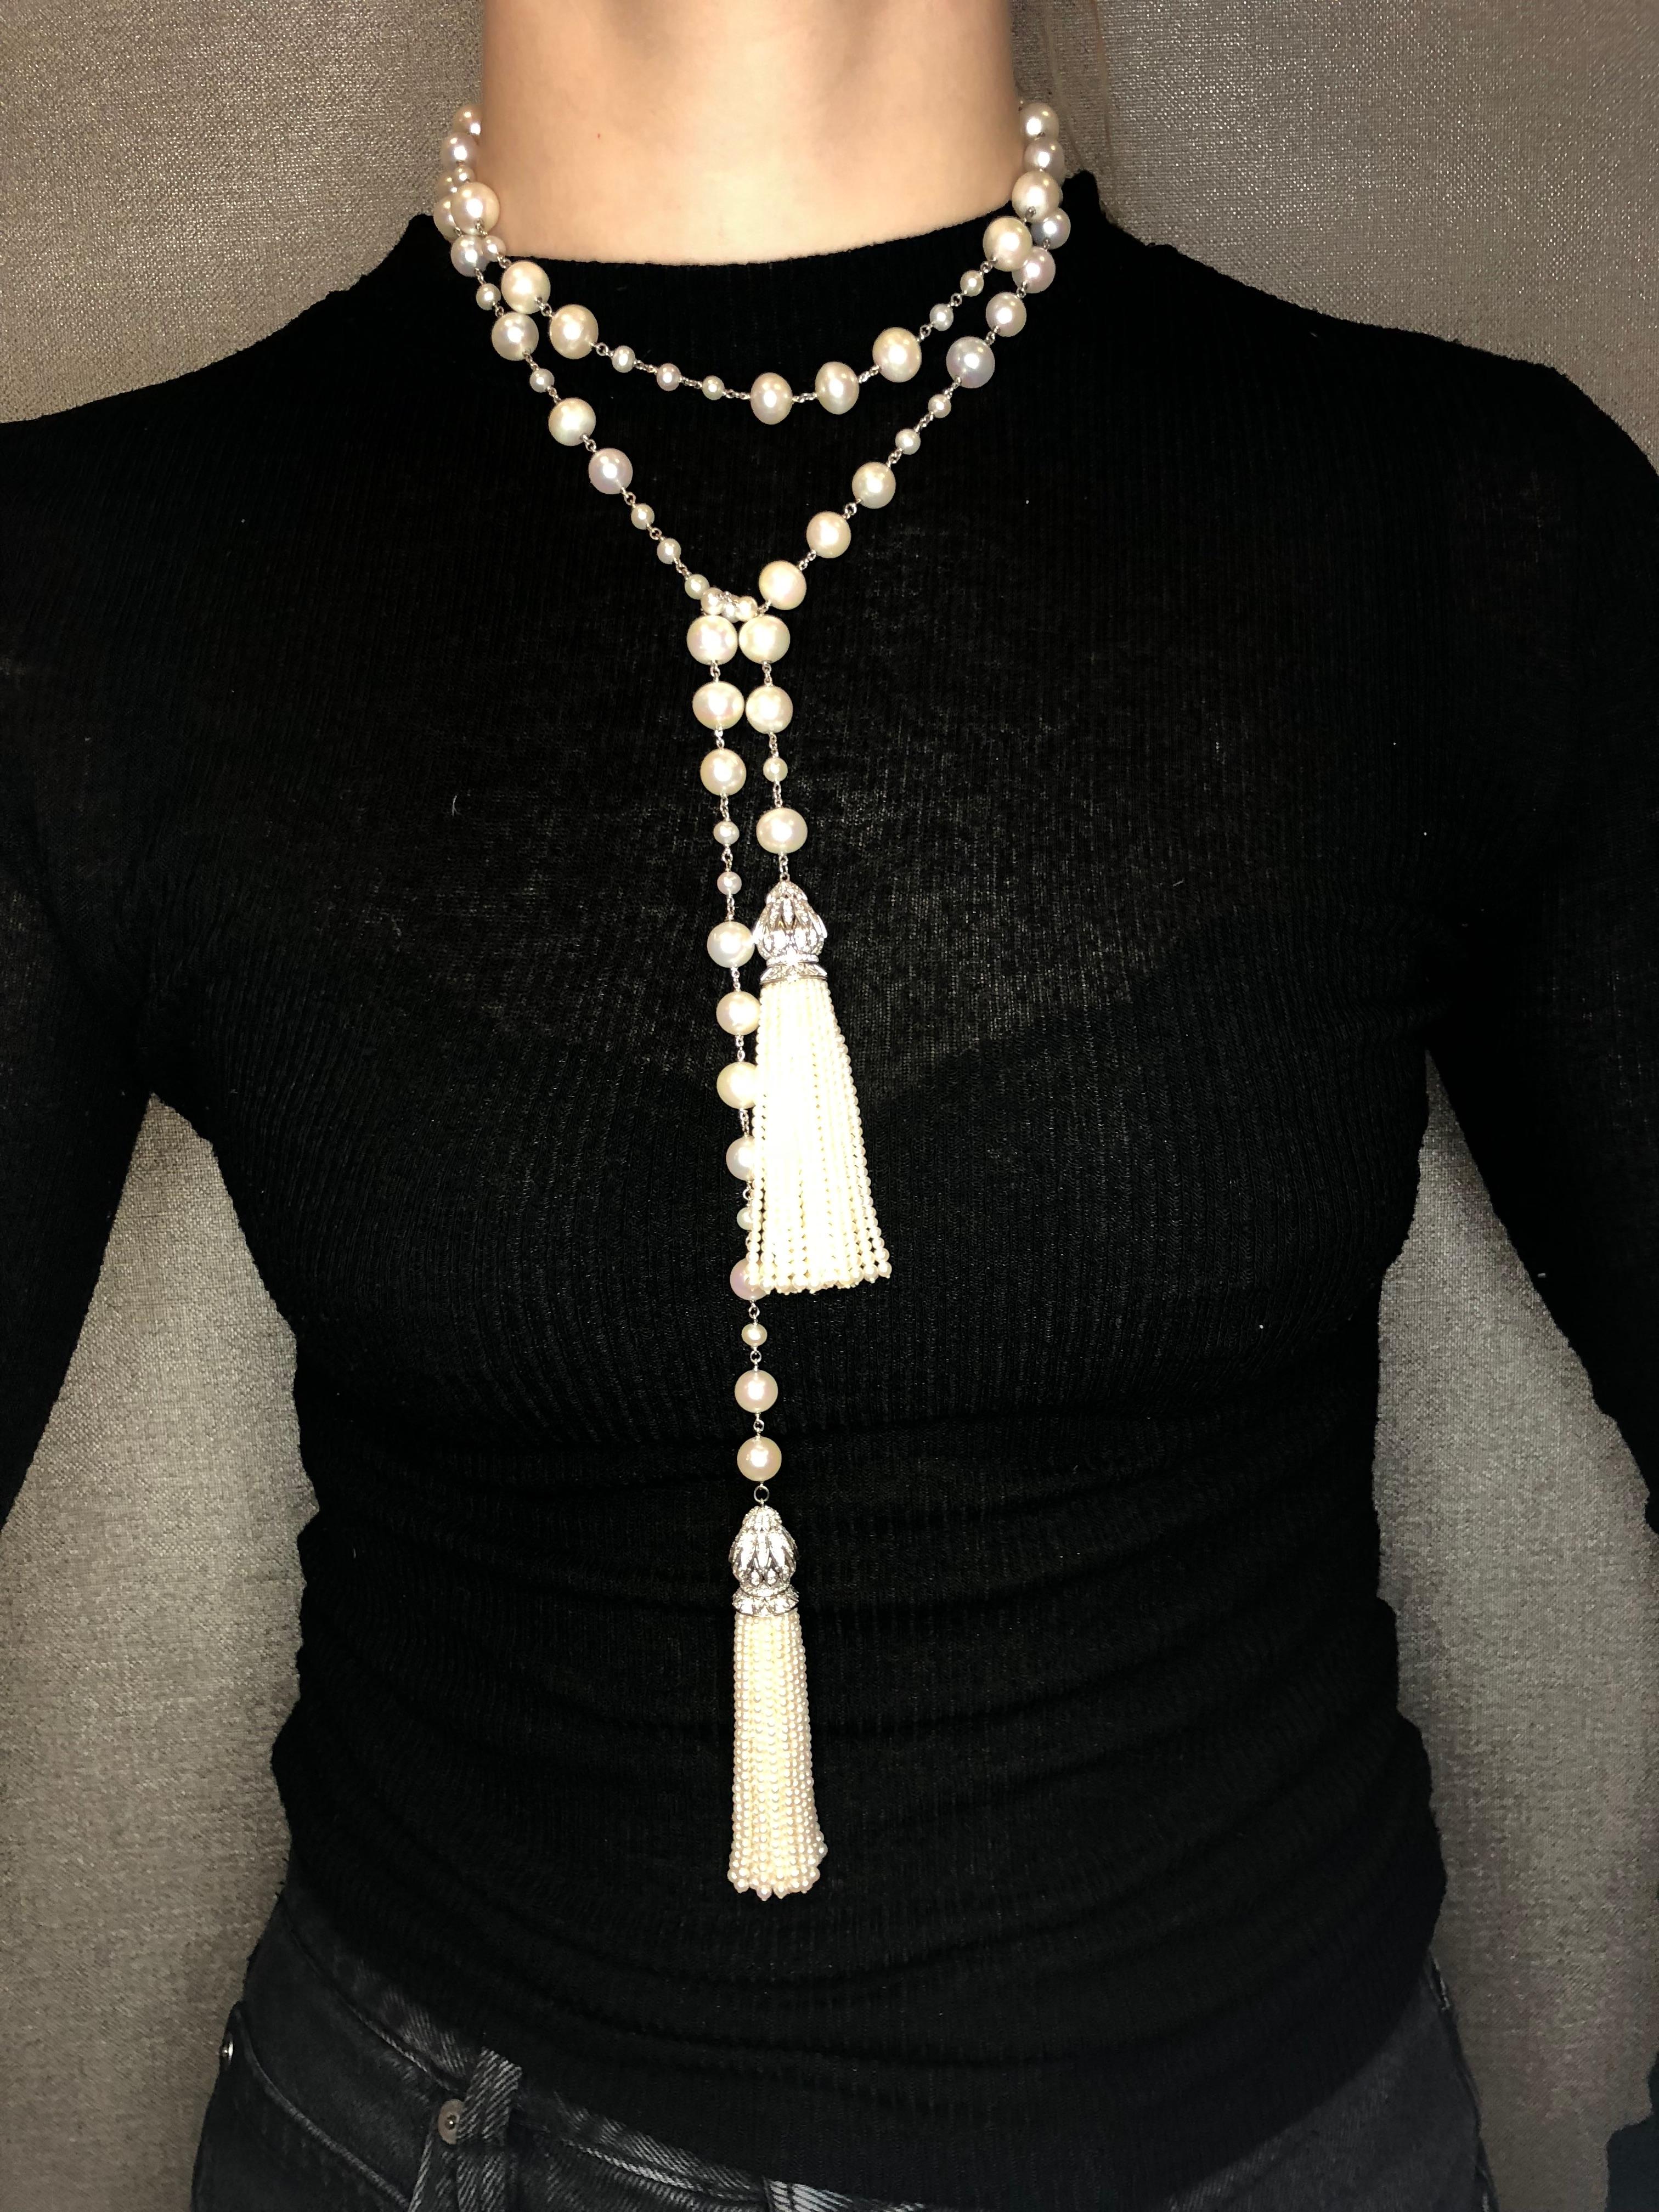 A beautiful and versatile Tassel Necklace with hand strung natural freshwater pearl tassels finished with 18k White Gold Caps set with 344 Diamonds for a total of 2.80 Carats. The 18k White gold and freshwater pearl chain is 44 inches long and the